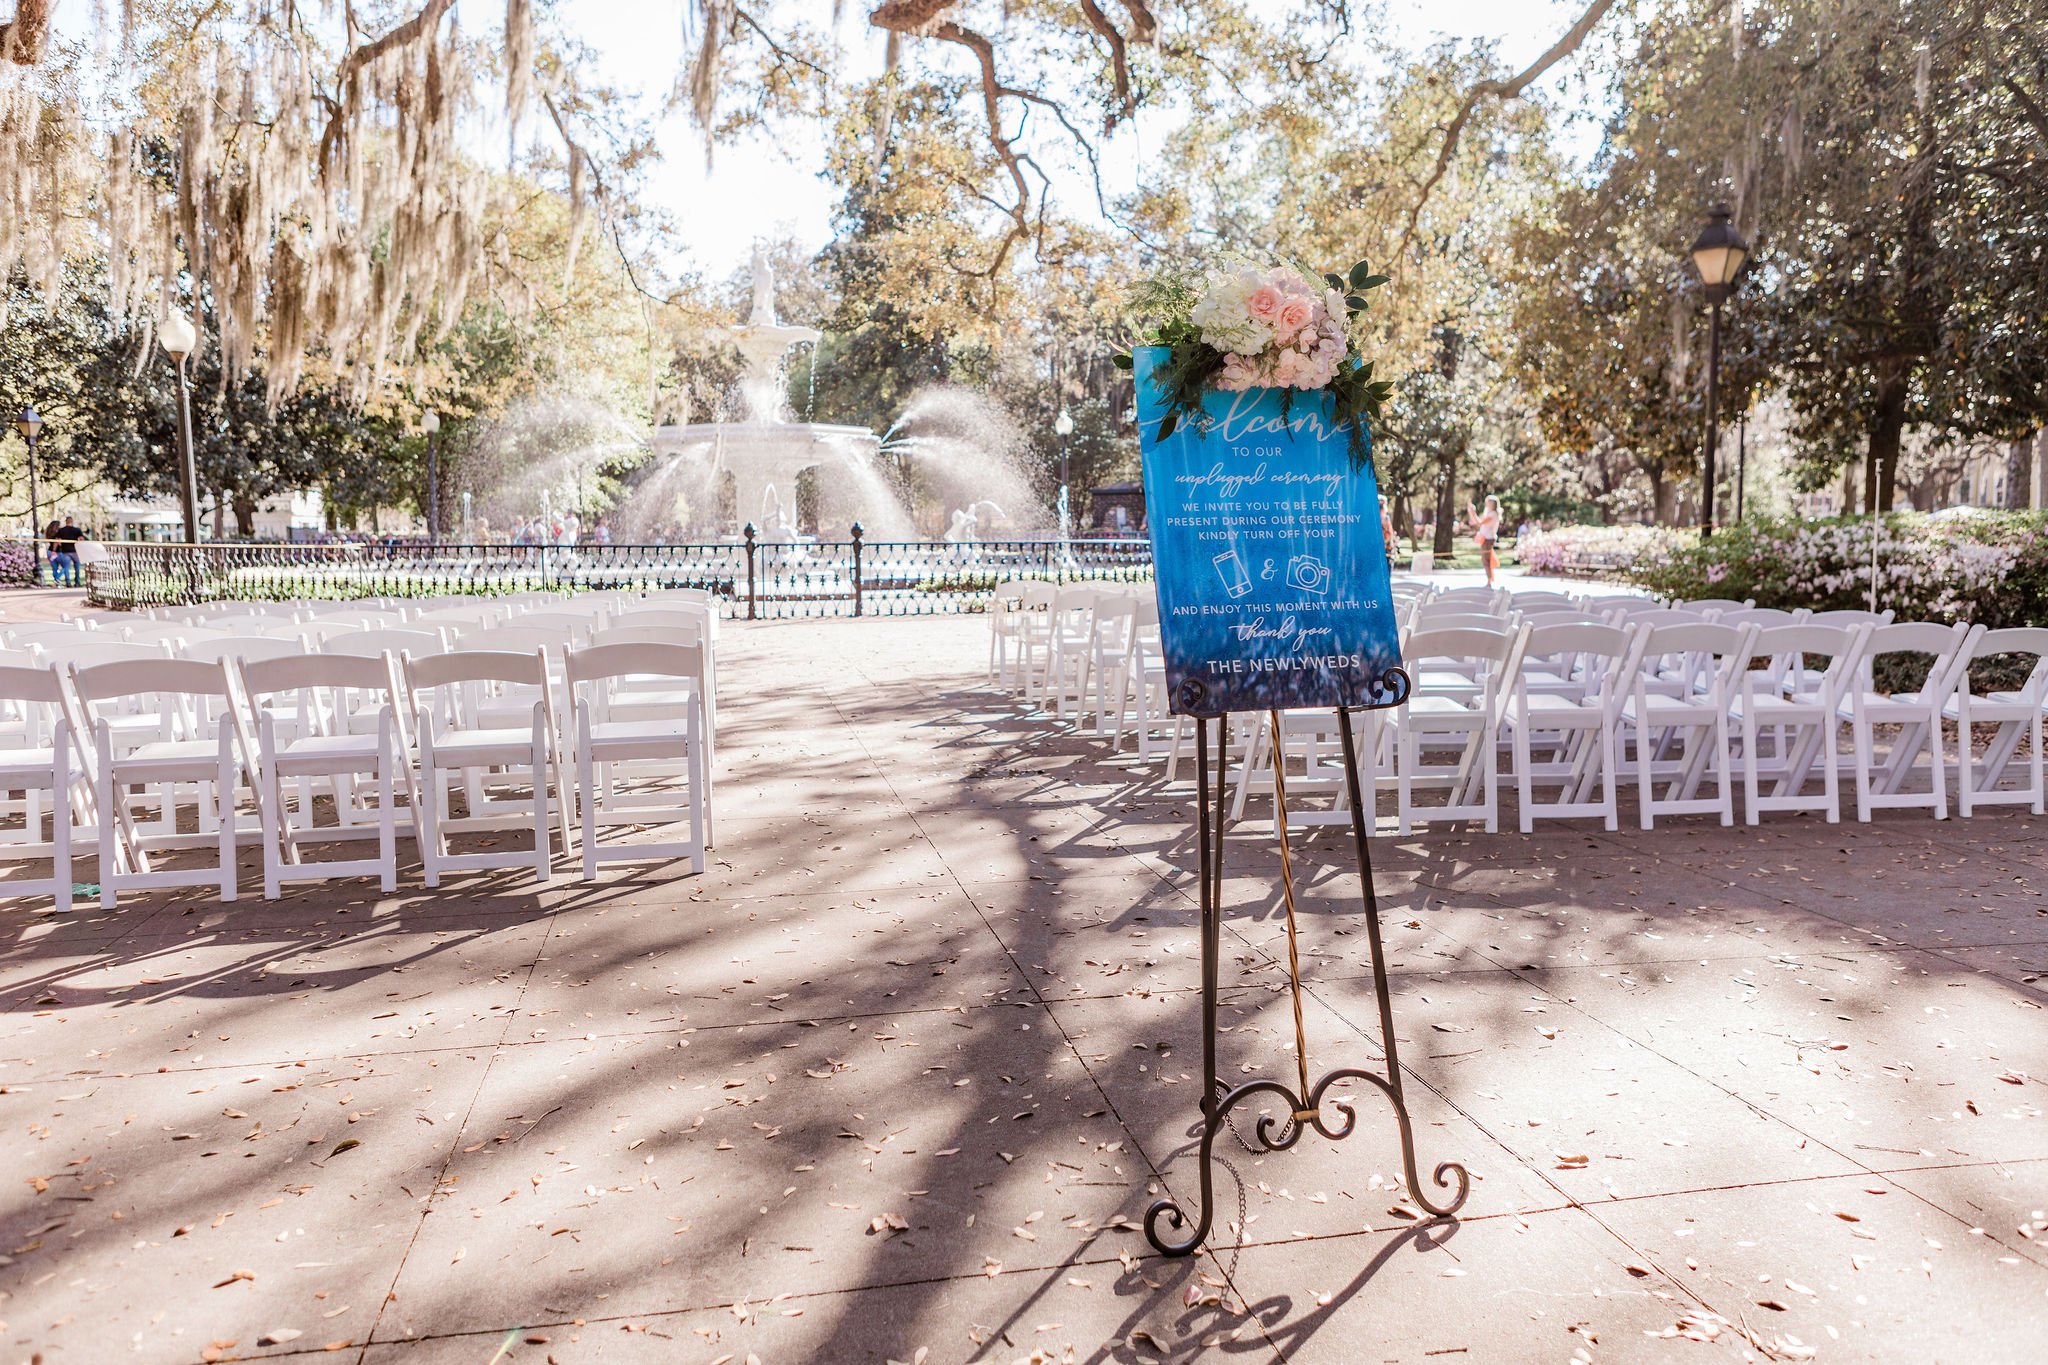 Victoria-and-stuarts-pastel-spring-wedding-at-the-forsyth-park-fountain-and-the-mansion-on-forsyth-in-savannah-georgia-planned-by-savannah-wedding-planner-and-savannah-wedding-florist-ivory-and-beau-8.JPG